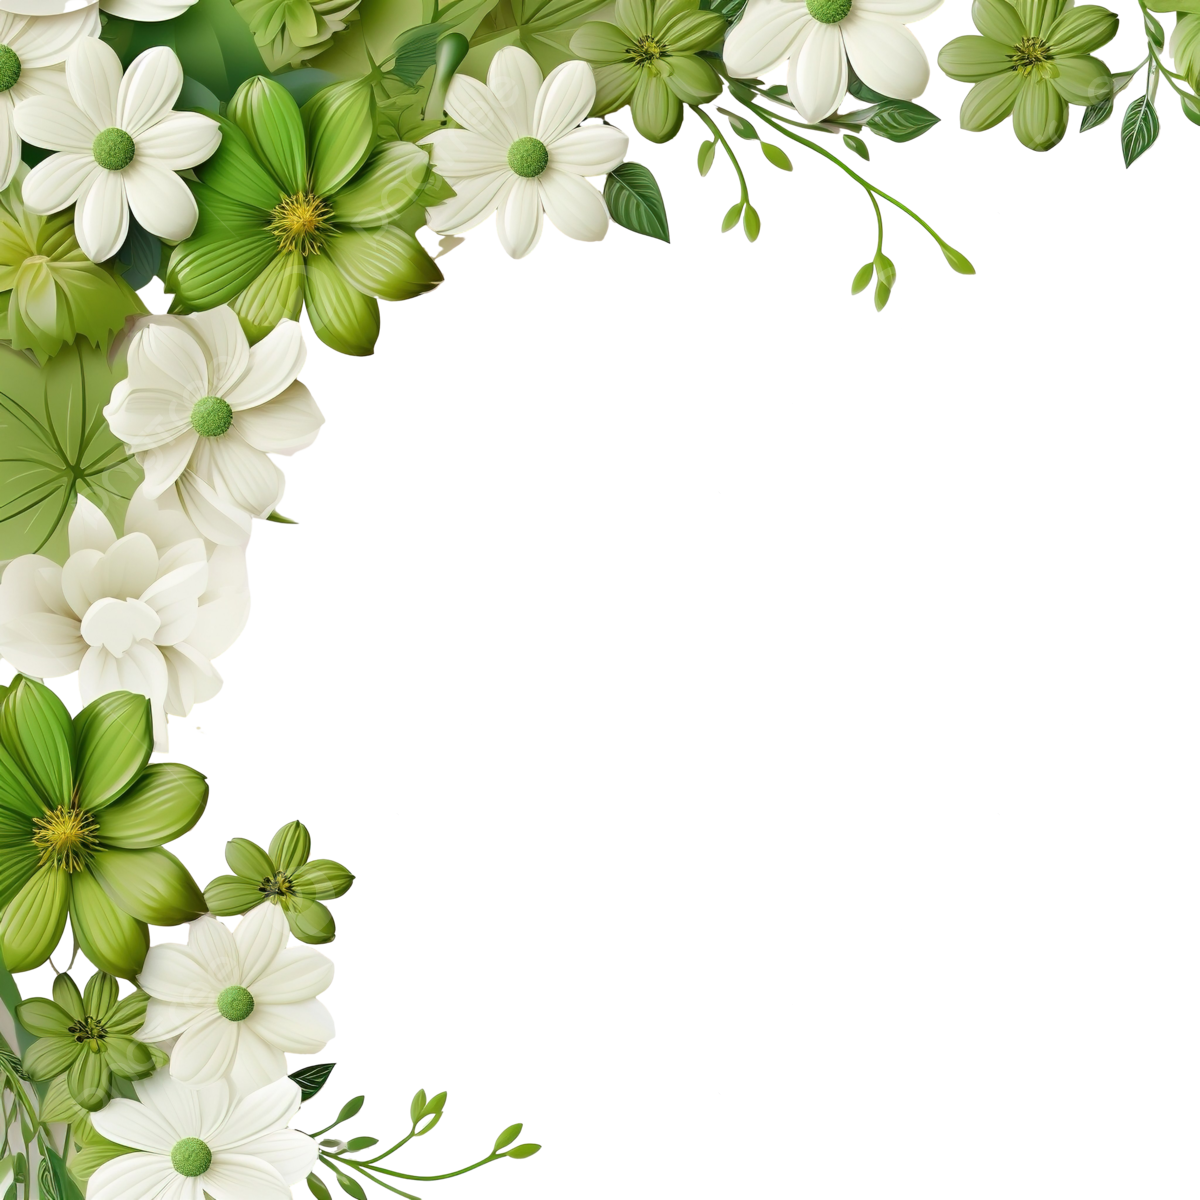 Flowers Border PNG HD Image